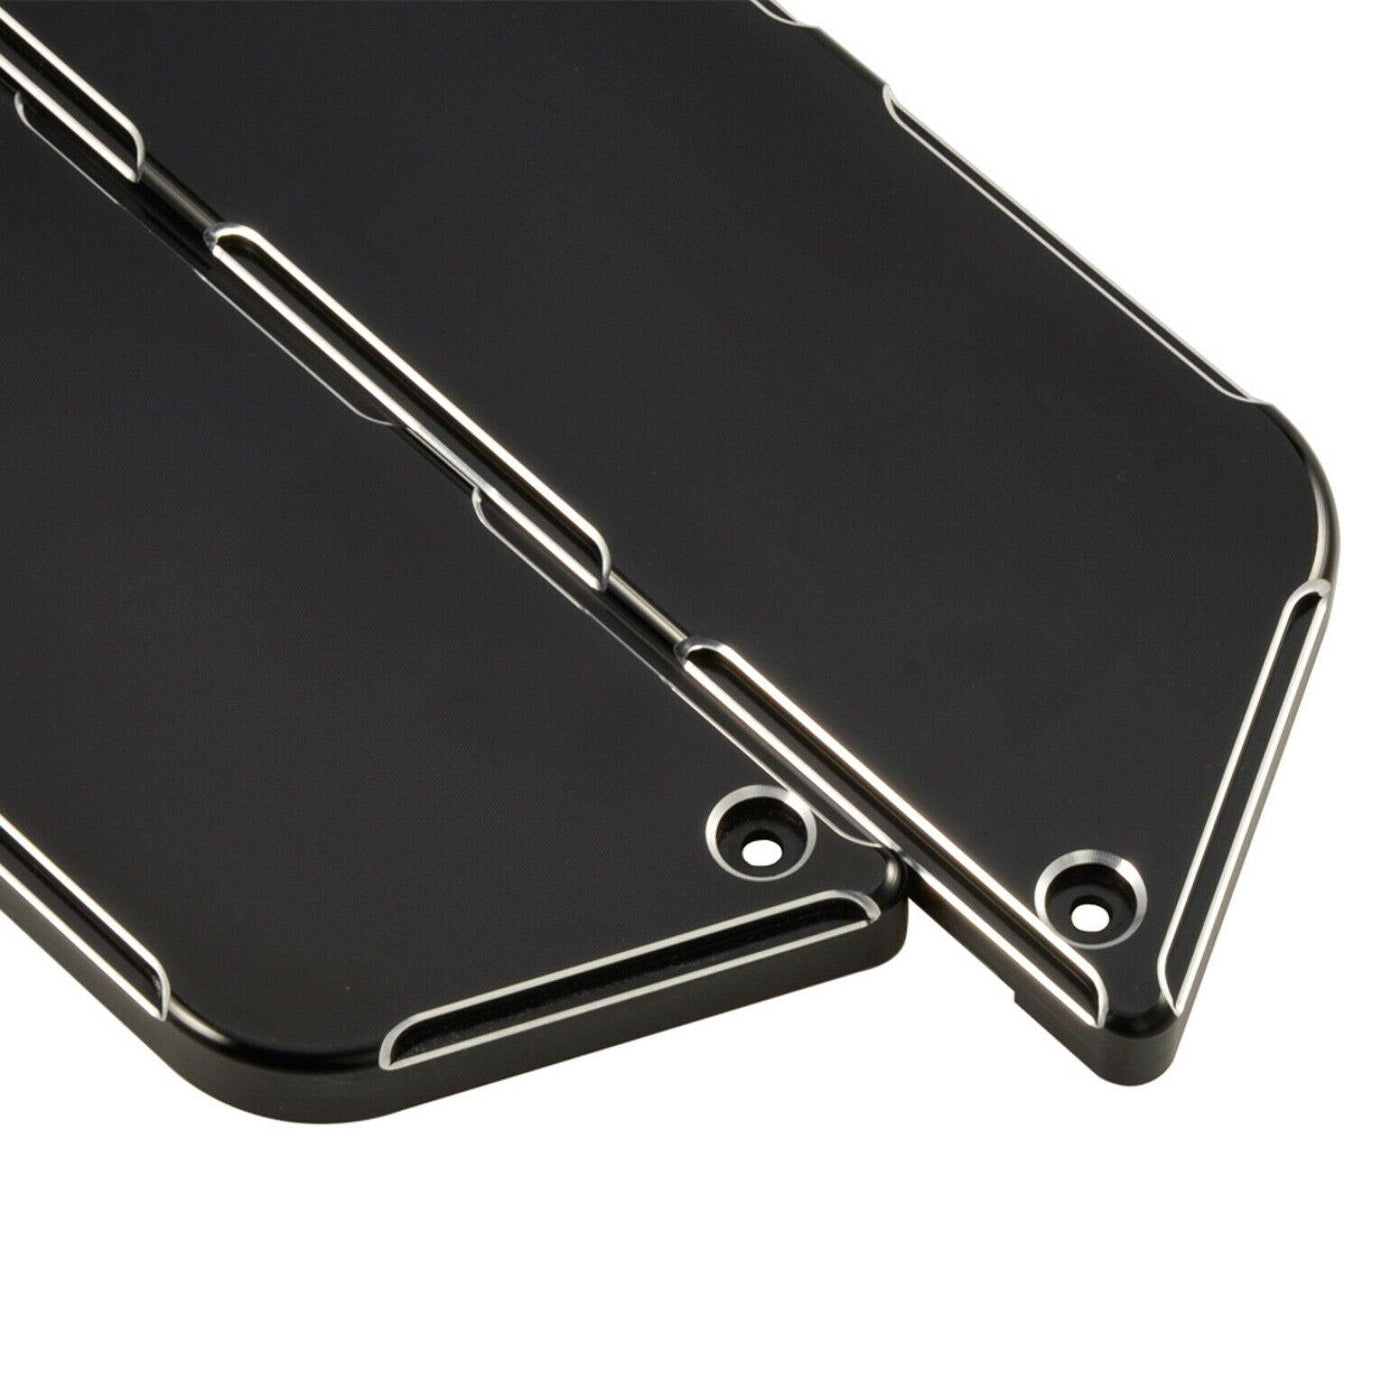 Hard Bag Saddlebag Latch Cover Fit for Harley Touring Road King Glide 1993-13 - Moto Life Products